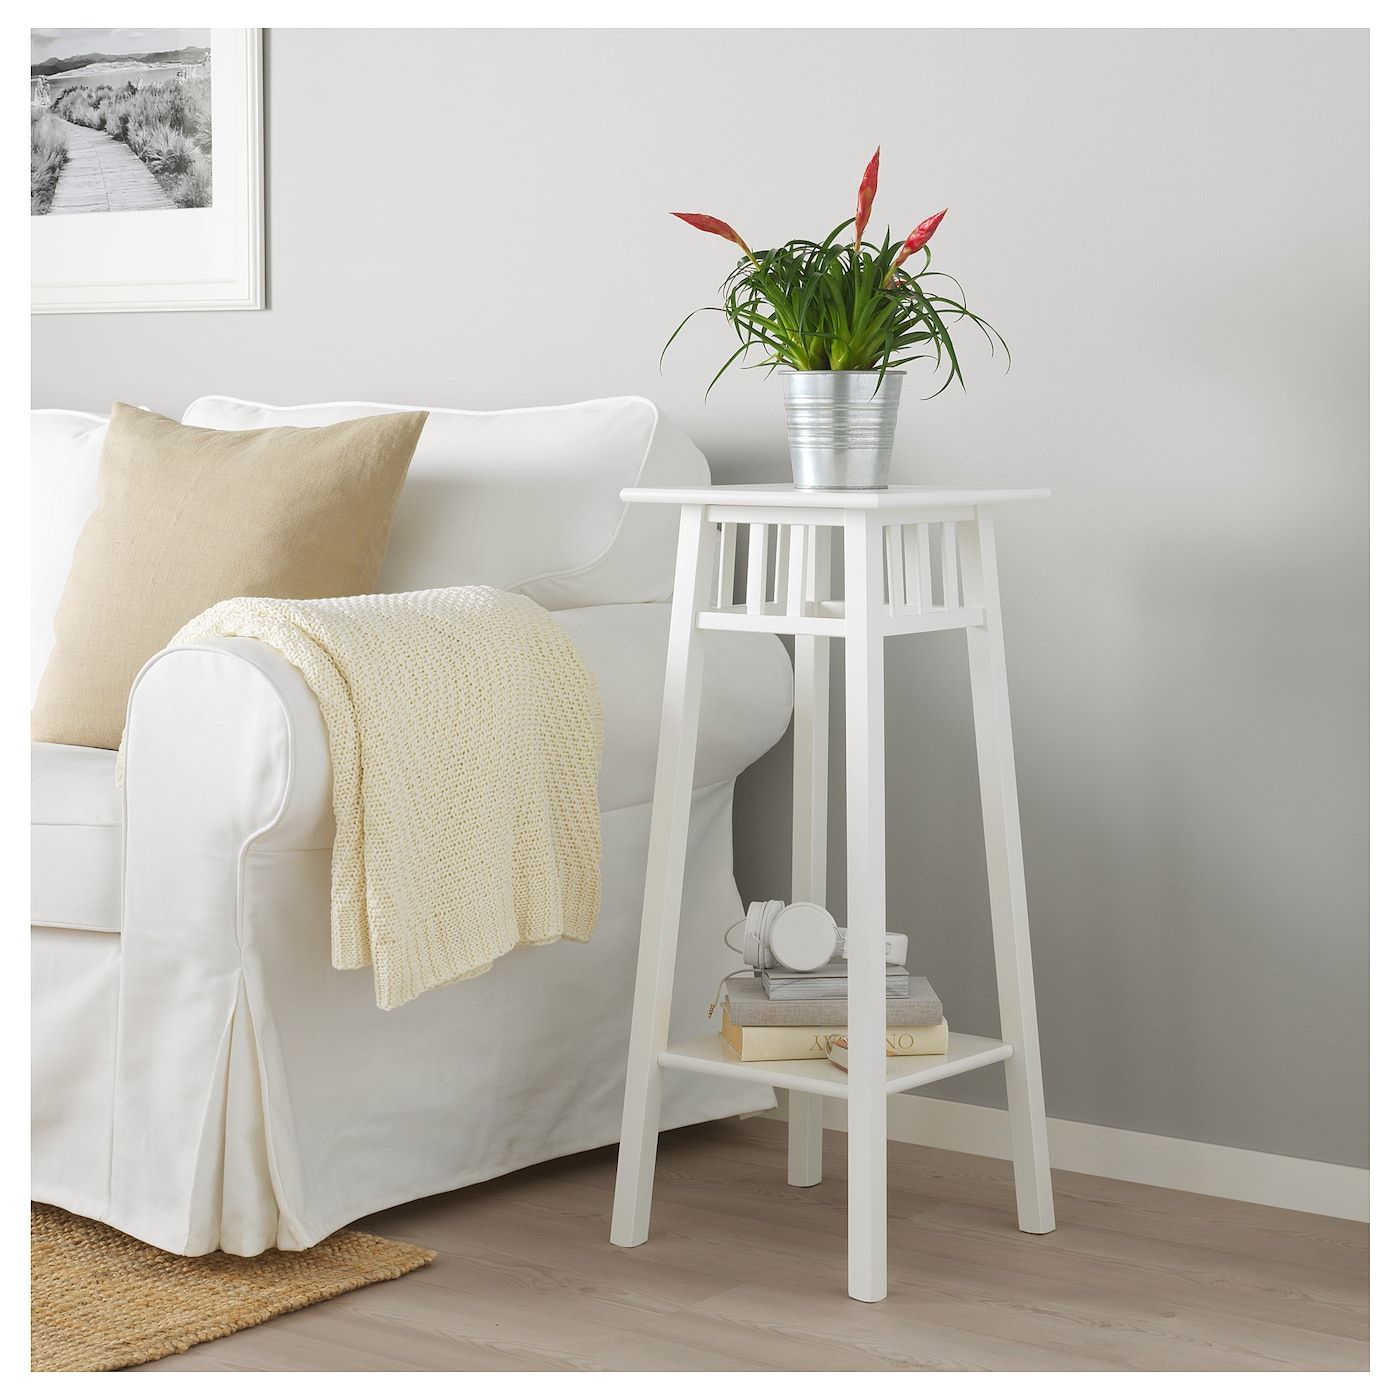 Lantliv Plant Stand, White, 78 Cm – Ikea Ireland Throughout White Plant Stands (View 9 of 15)